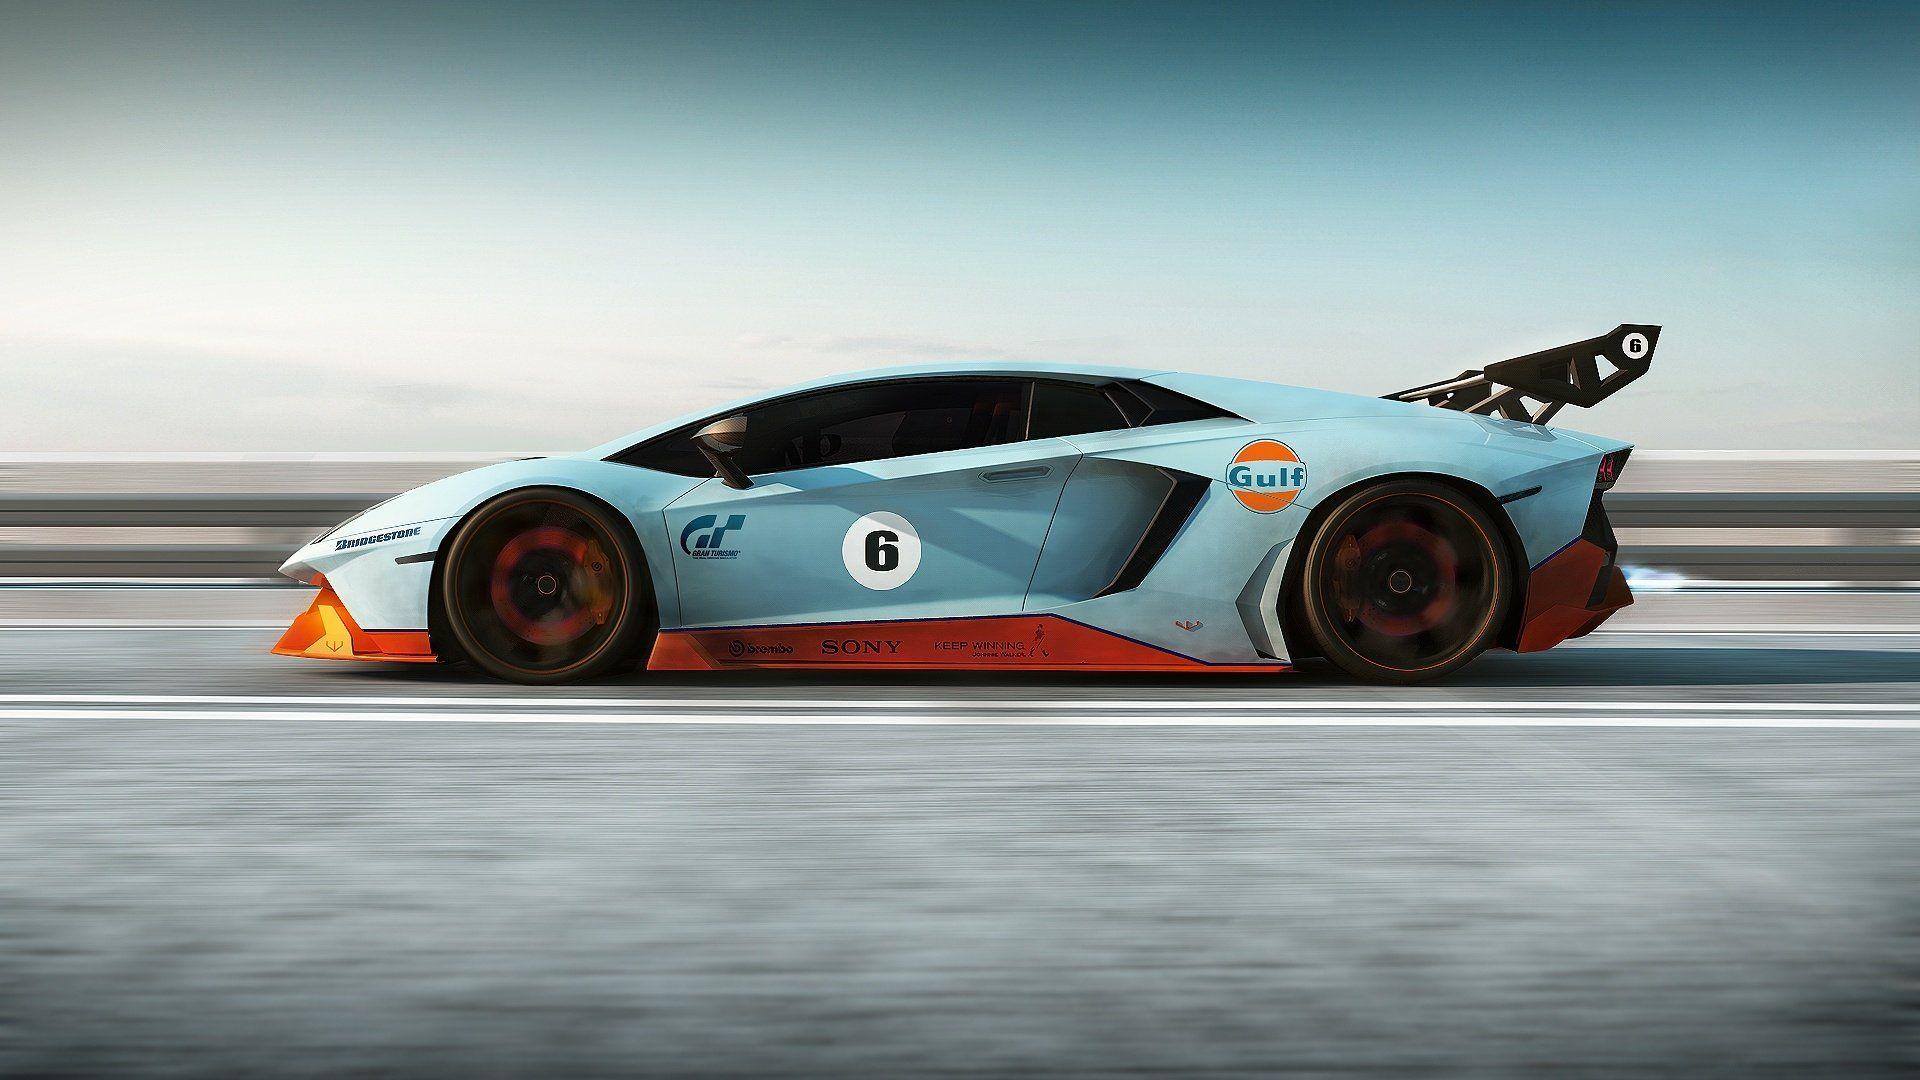 Gulf Racing for iPhone by Taquss on DeviantArt